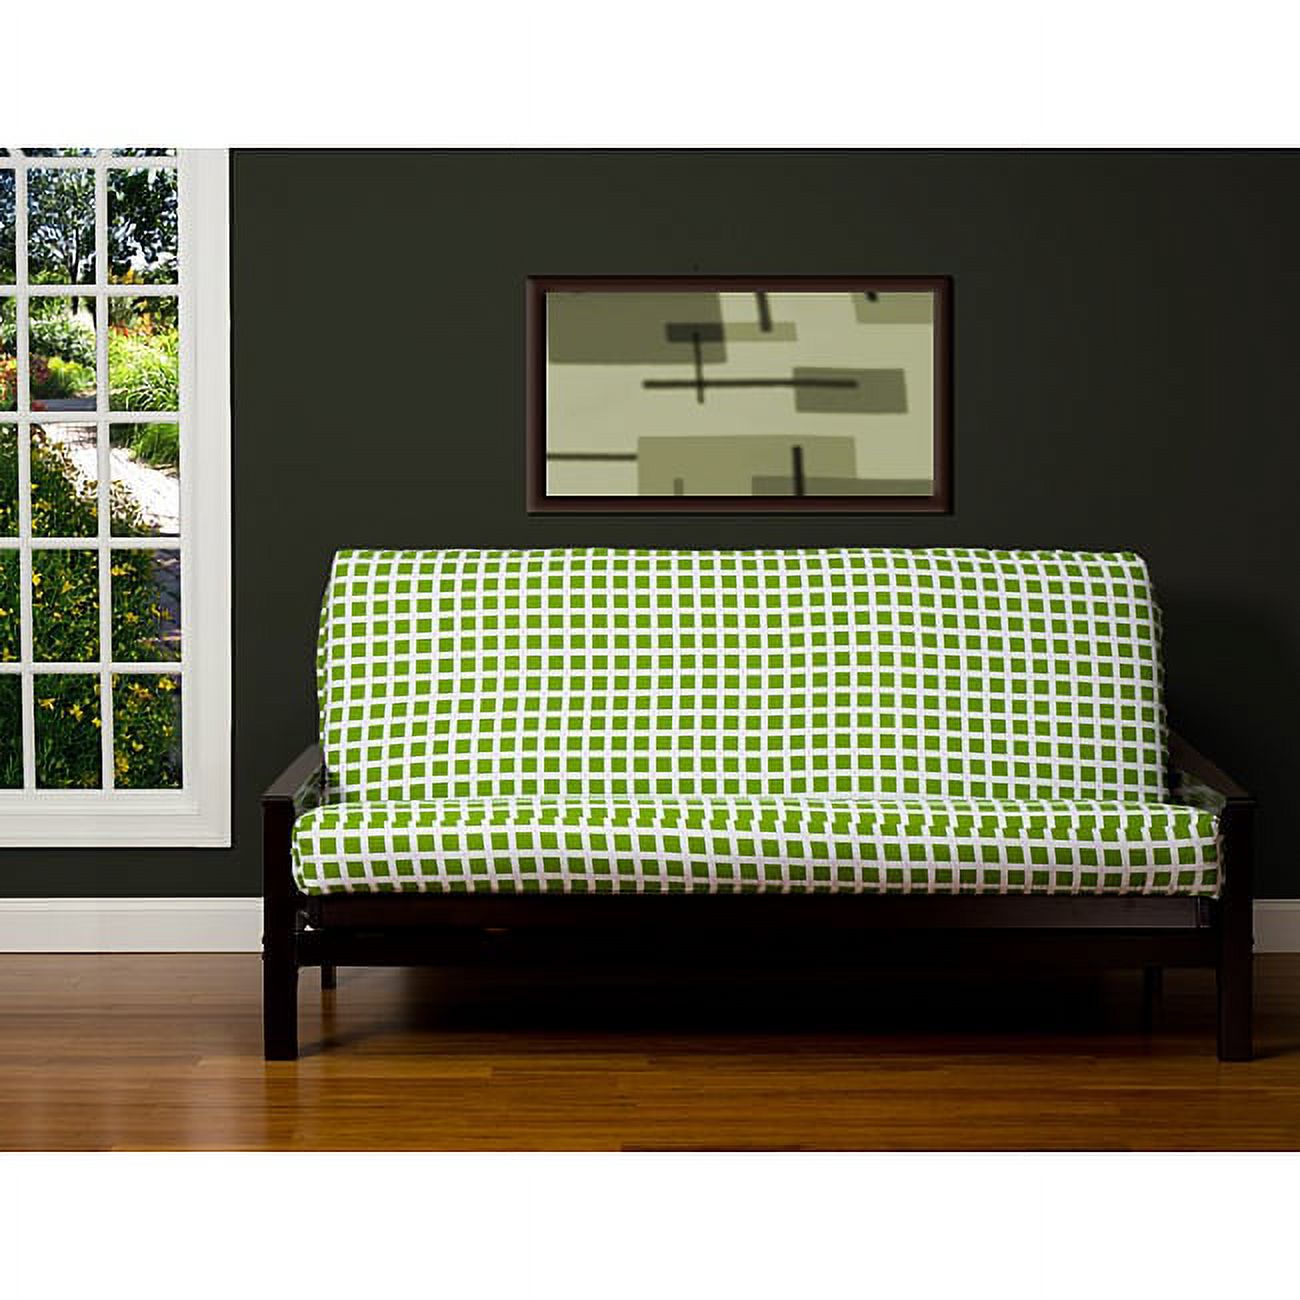 SIScovers Block Island Green 6-inch Queen-size Futon Cover - image 1 of 1